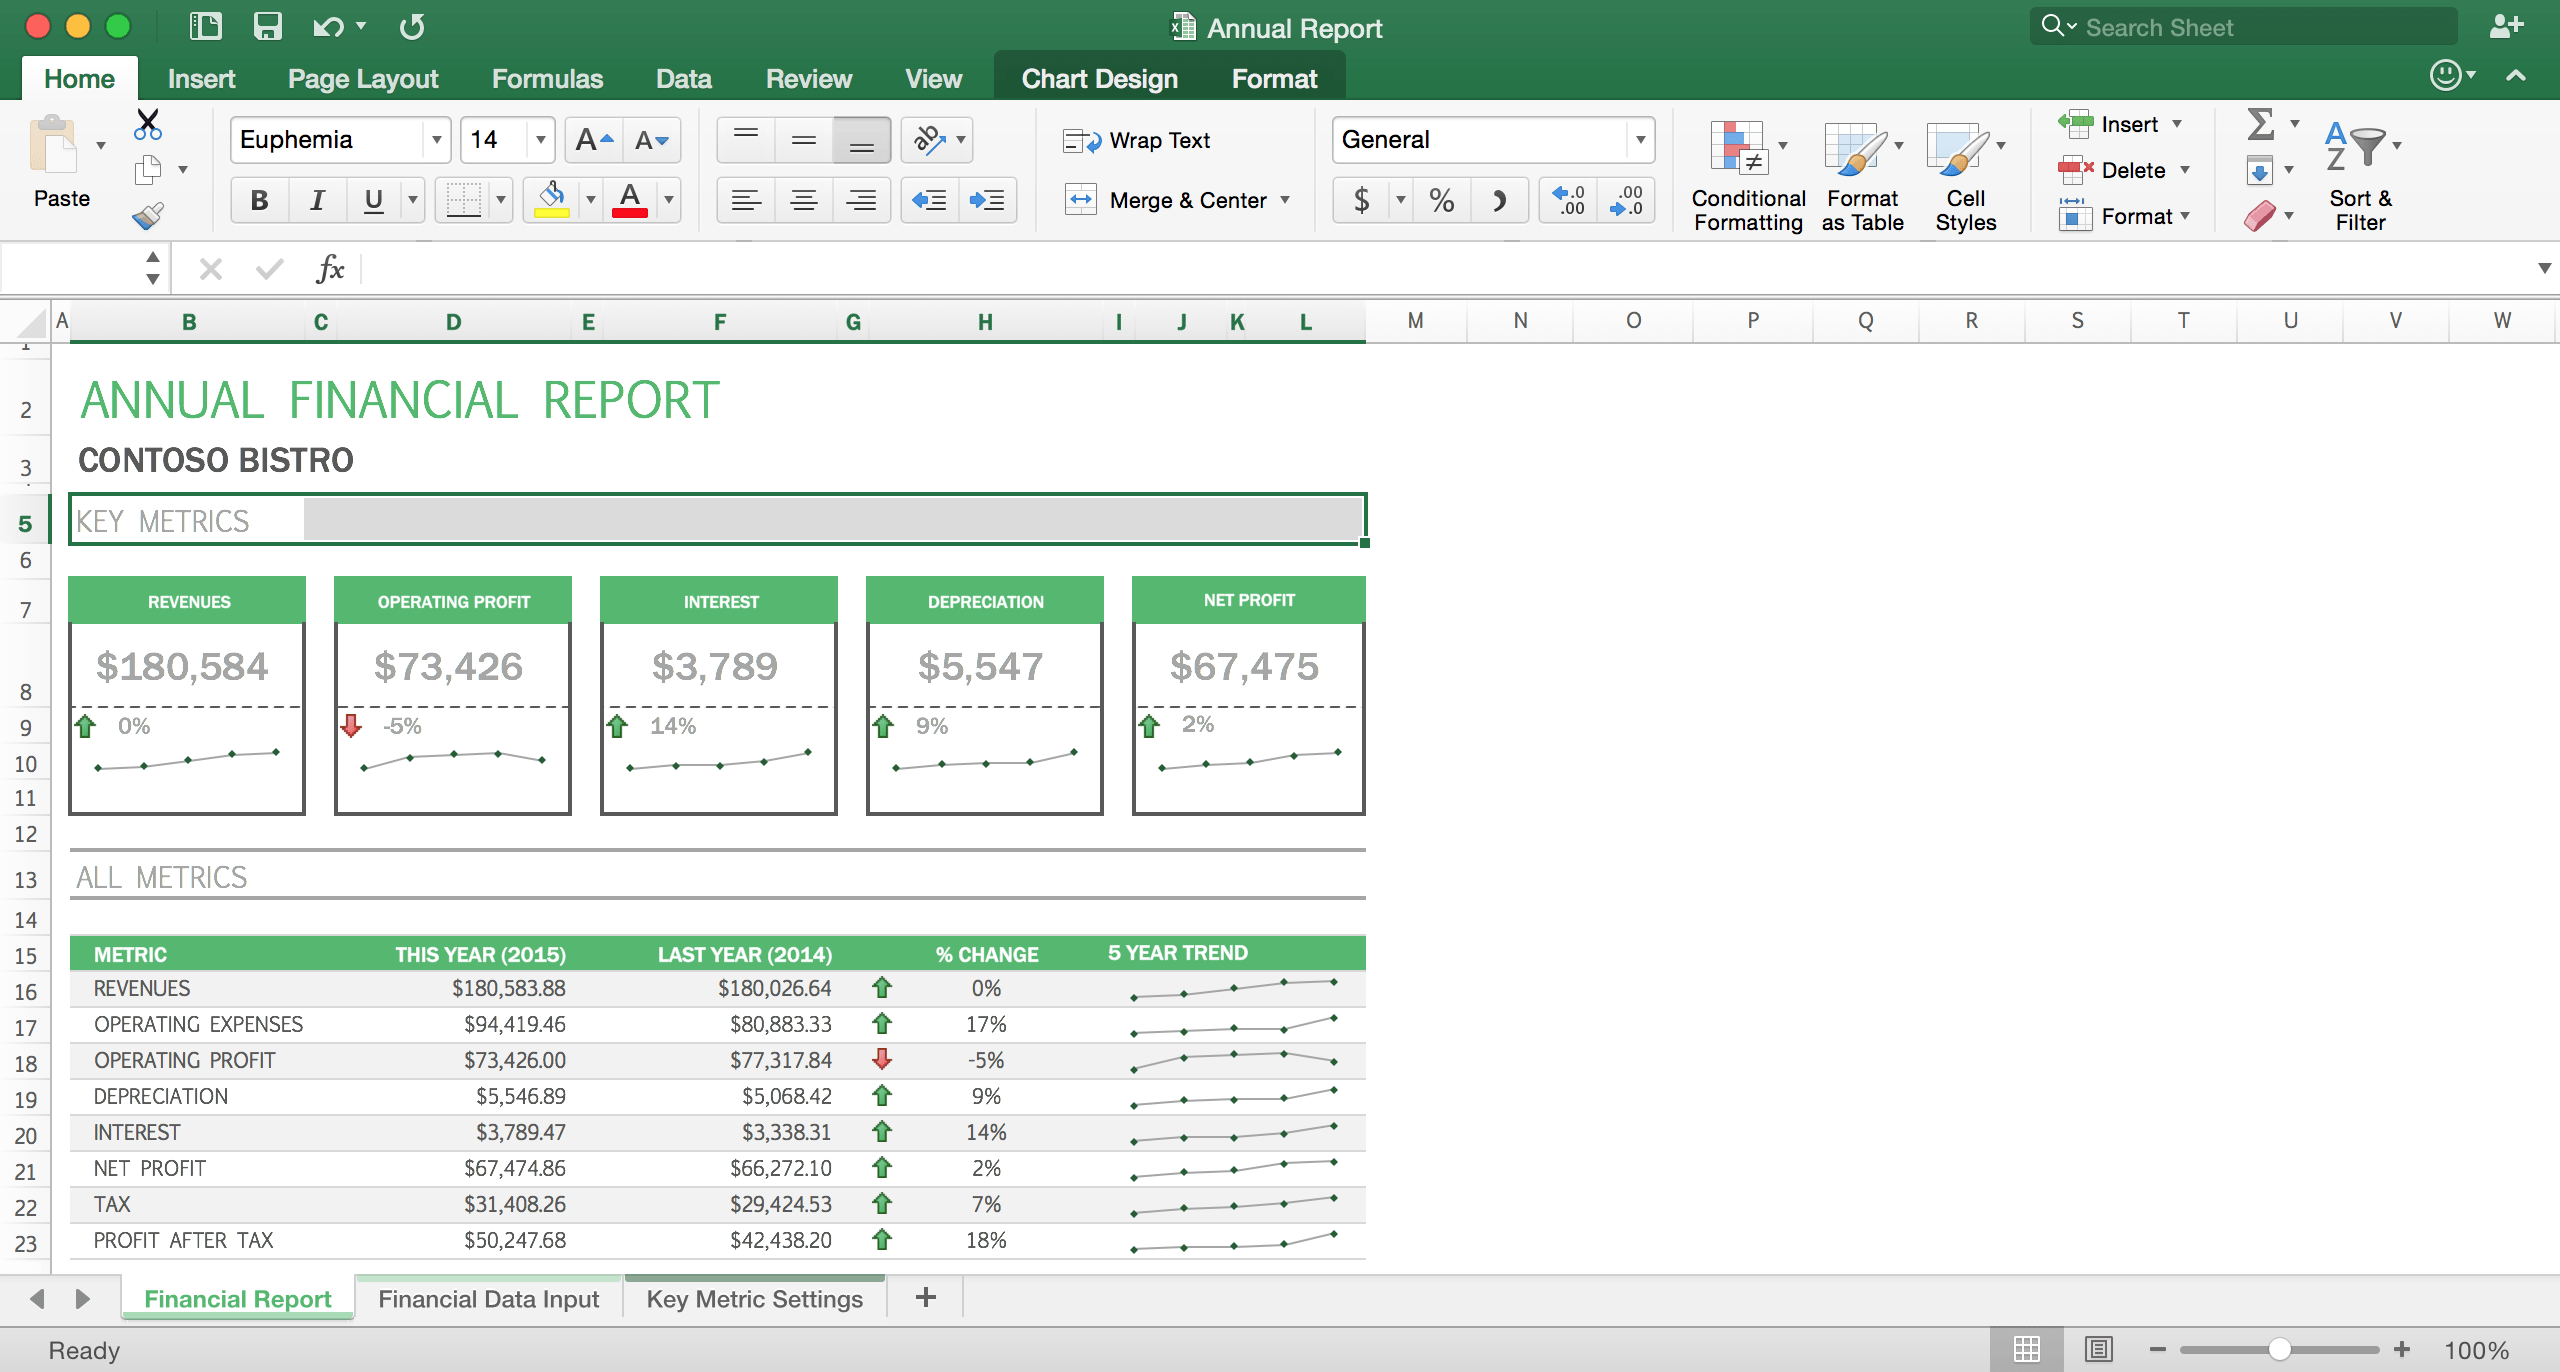 excel for mac new window